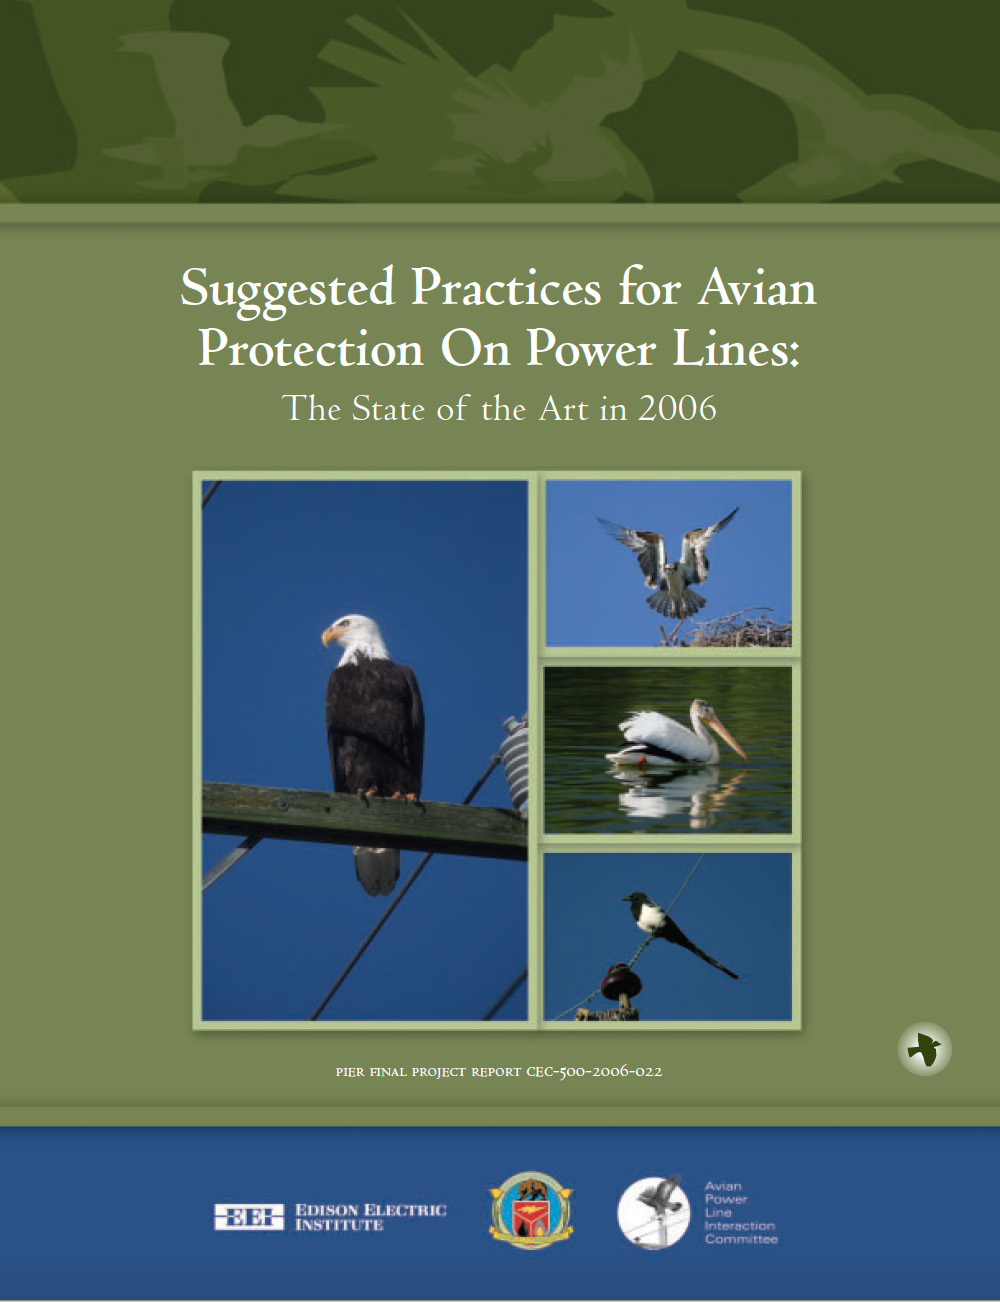 Suggested Practices for Avian Protection on Power Lines: The State of the Art in 2006